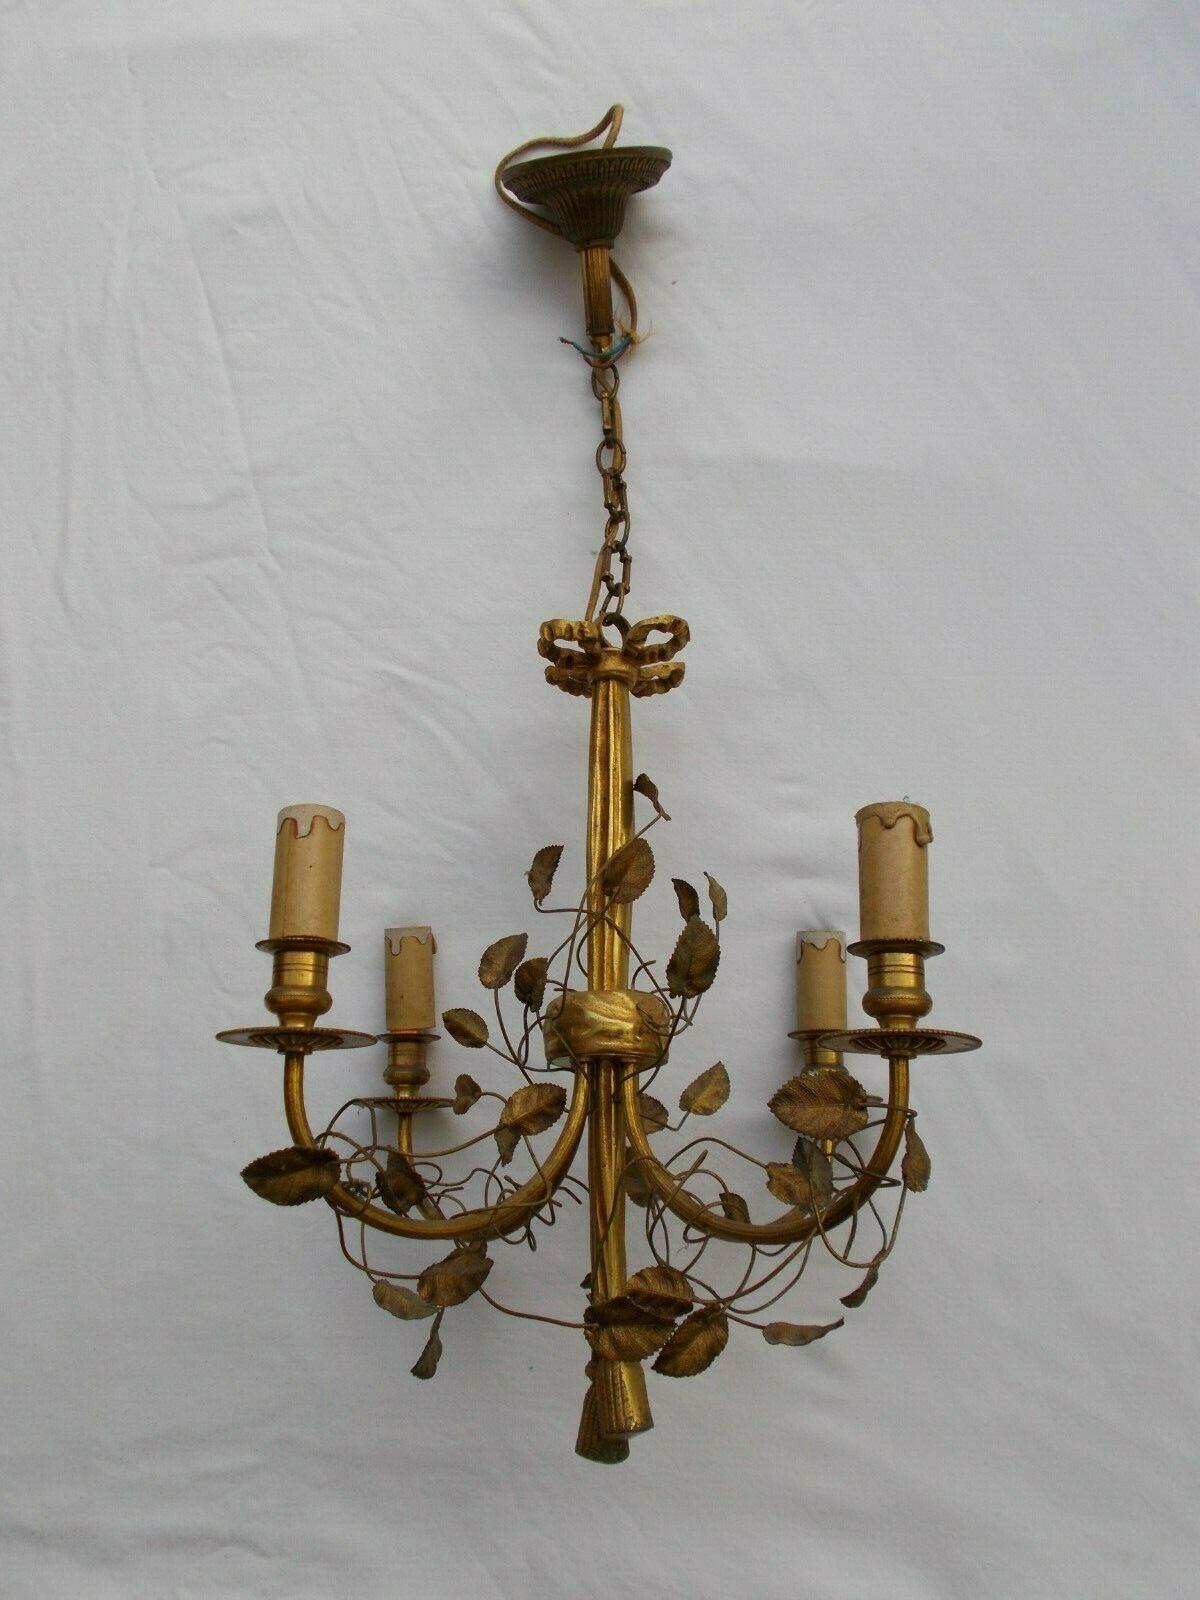 Early 20th Century 1910 Antique French Louis XVI style Bronze Floral/ Faux Draped Fabric Chandelier For Sale